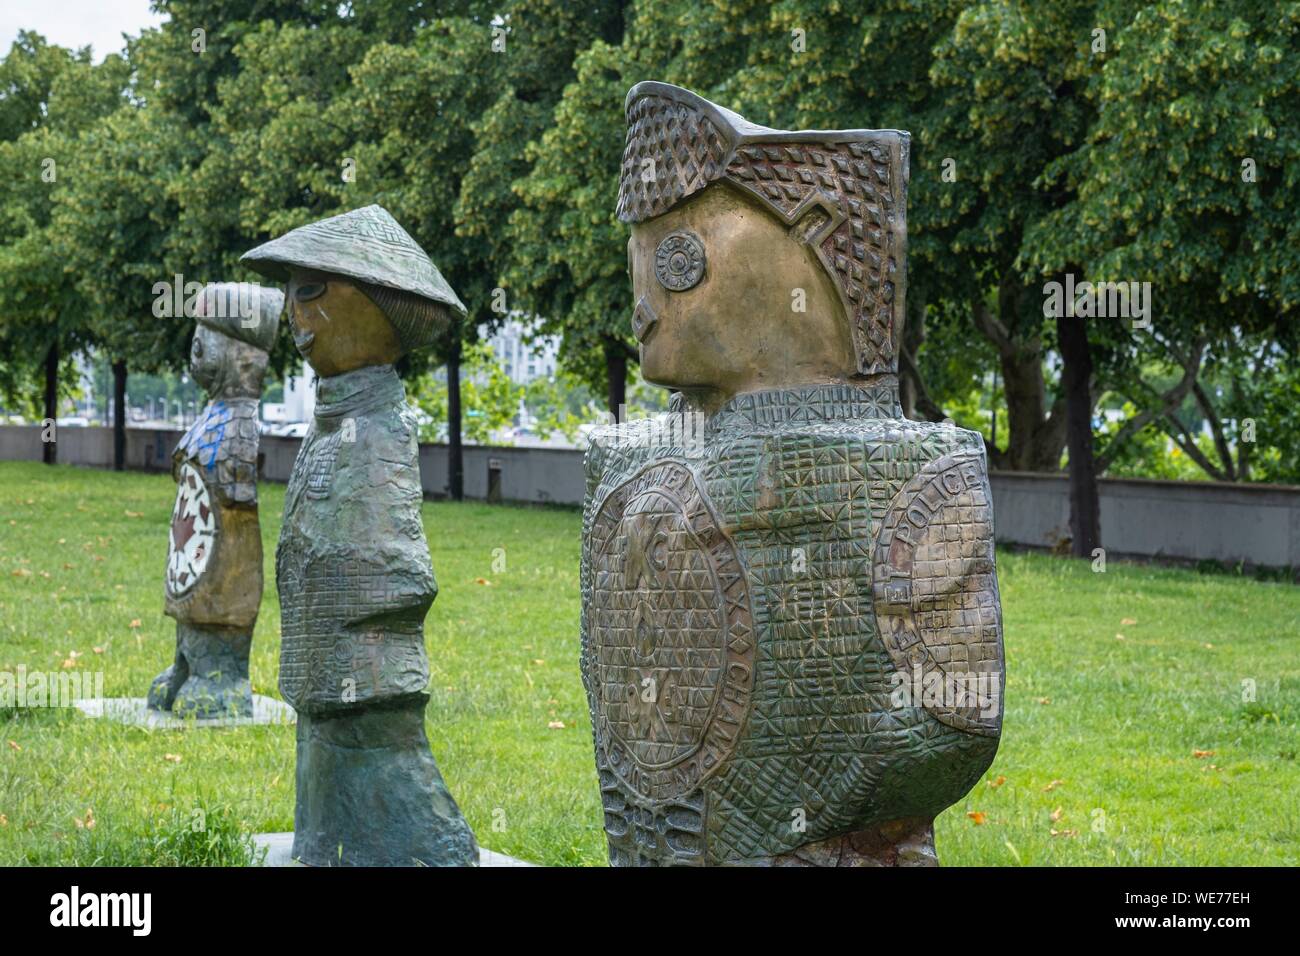 France, Paris, along the GR® Paris 2024, metropolitan long-distance hiking trail created in support of Paris bid for the 2024 Olympic Games, Bercy district, Parc de Bercy, Children of the World is a work of 21 bronze sculptures by the French sculptor Rachid Khimoune Stock Photo